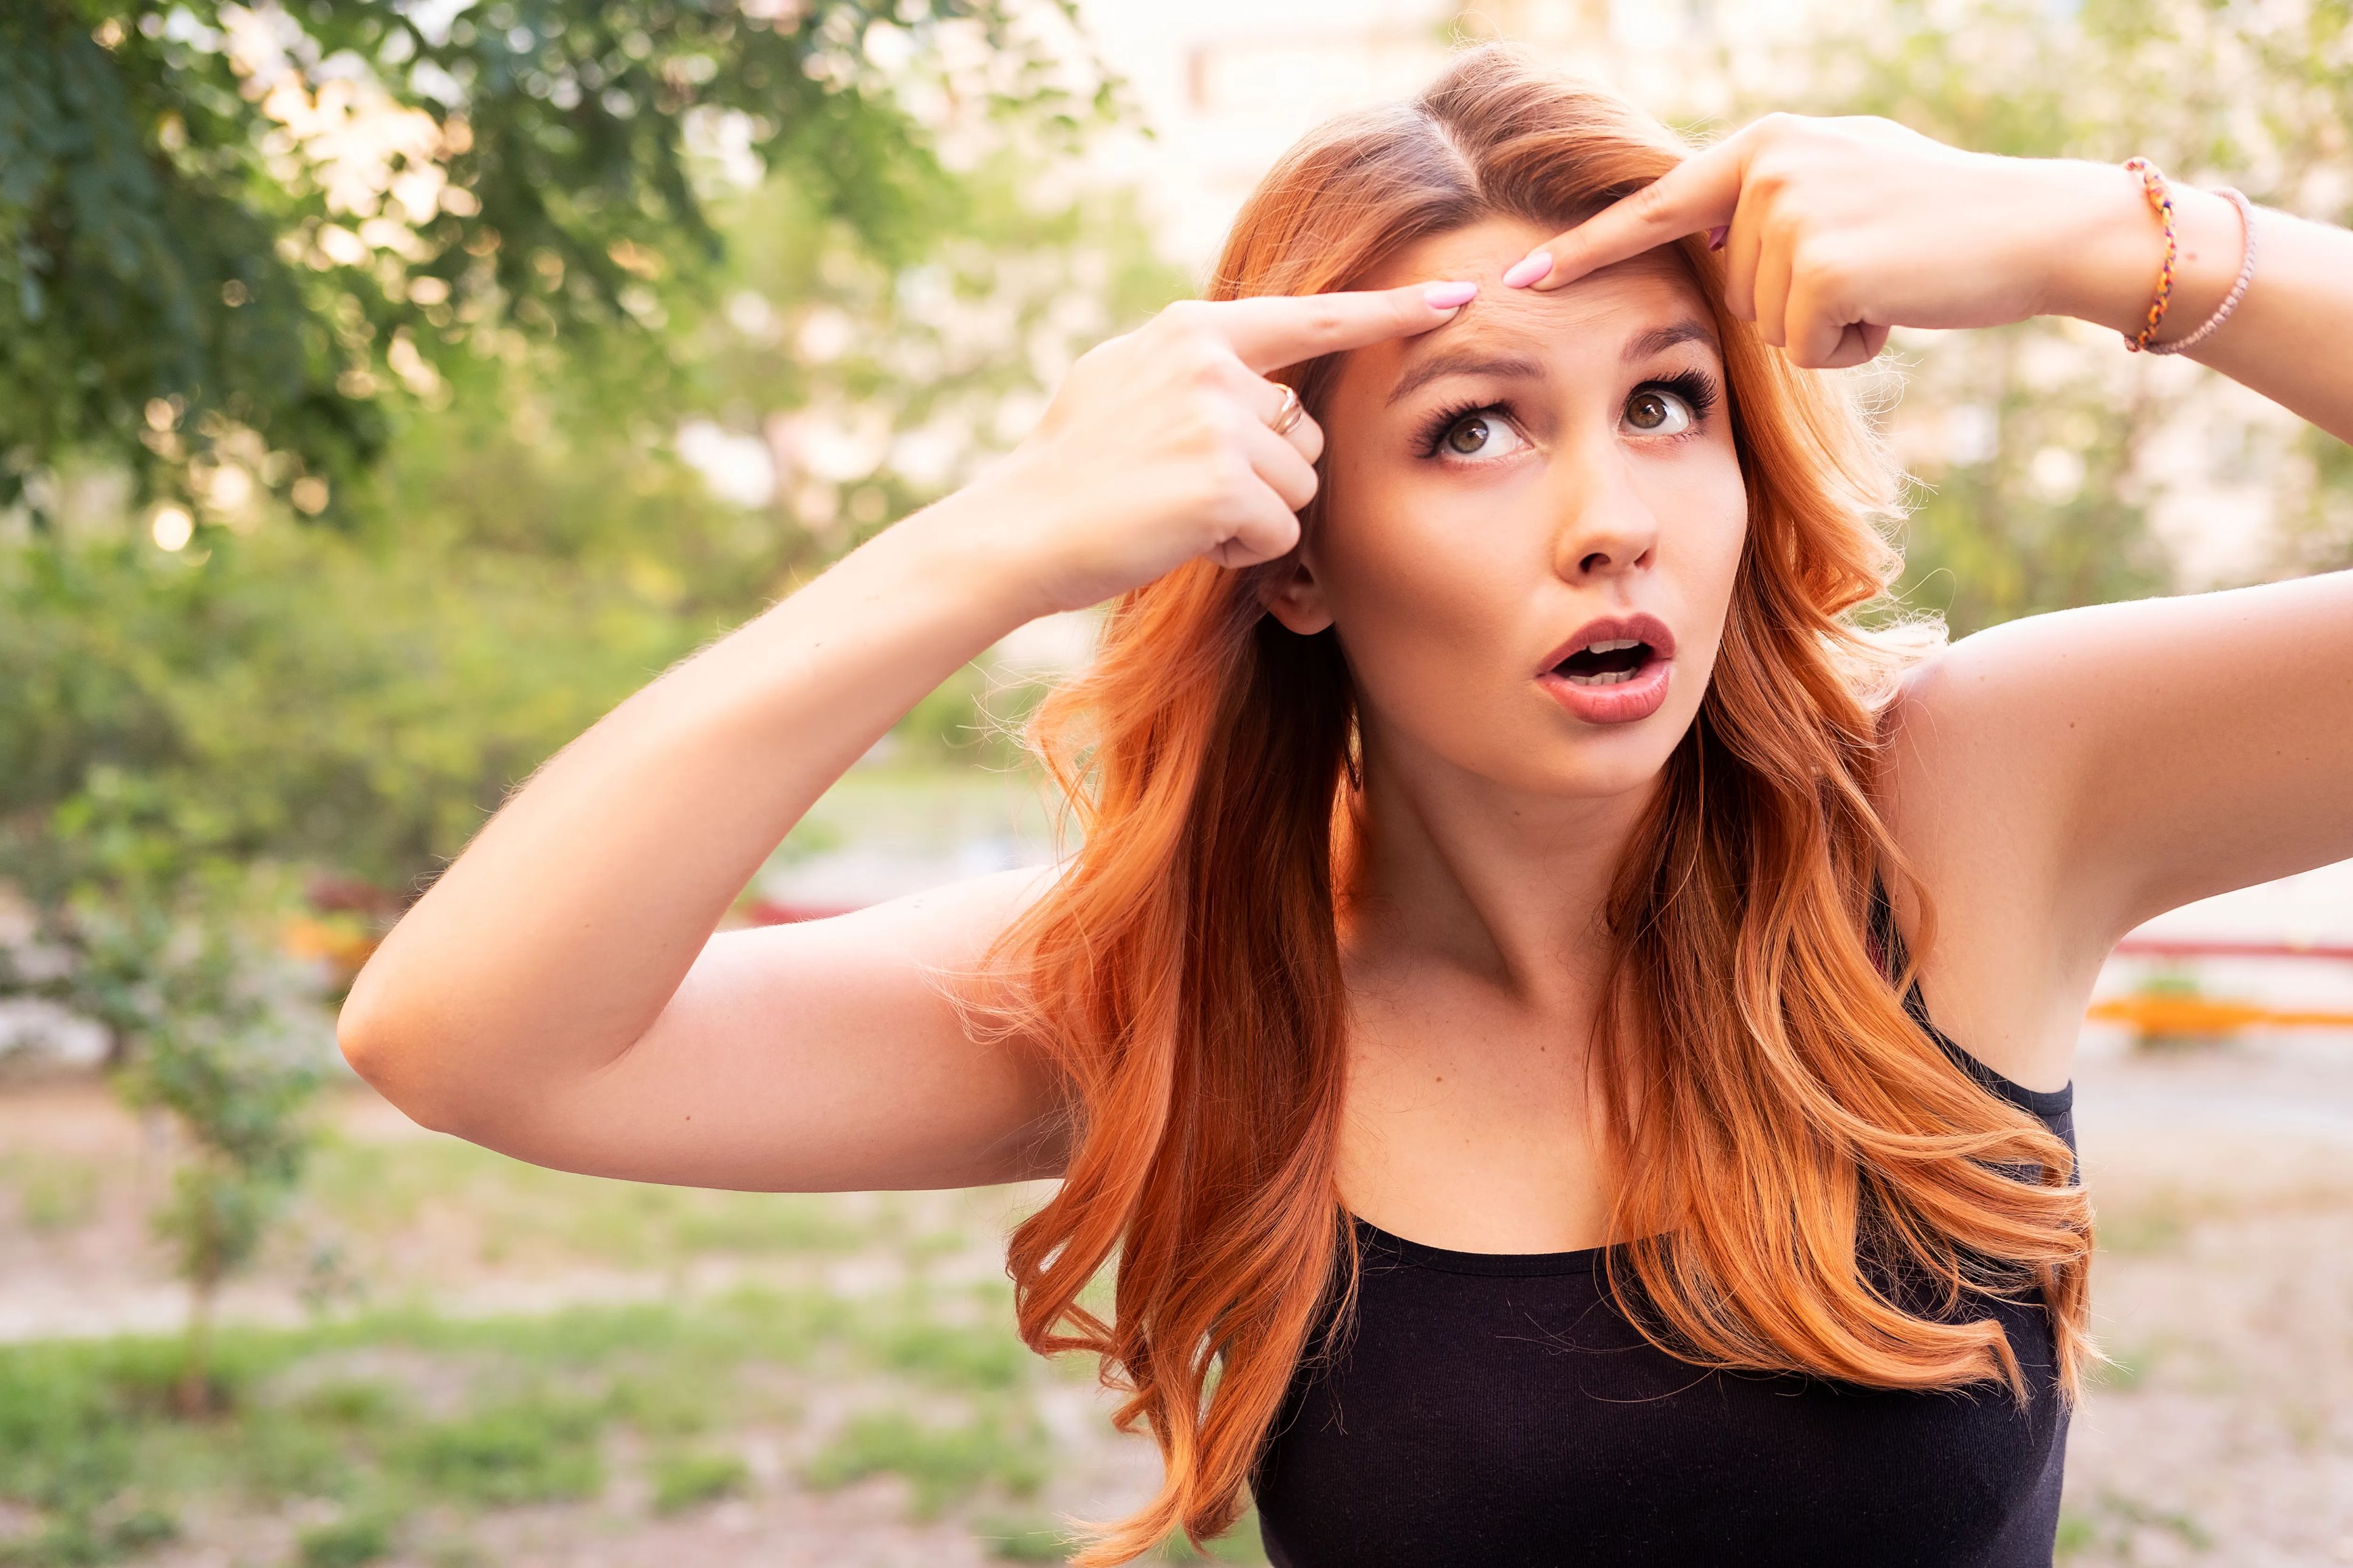 Young redheaded woman outdoors pointing to a pimple on her forehead. 